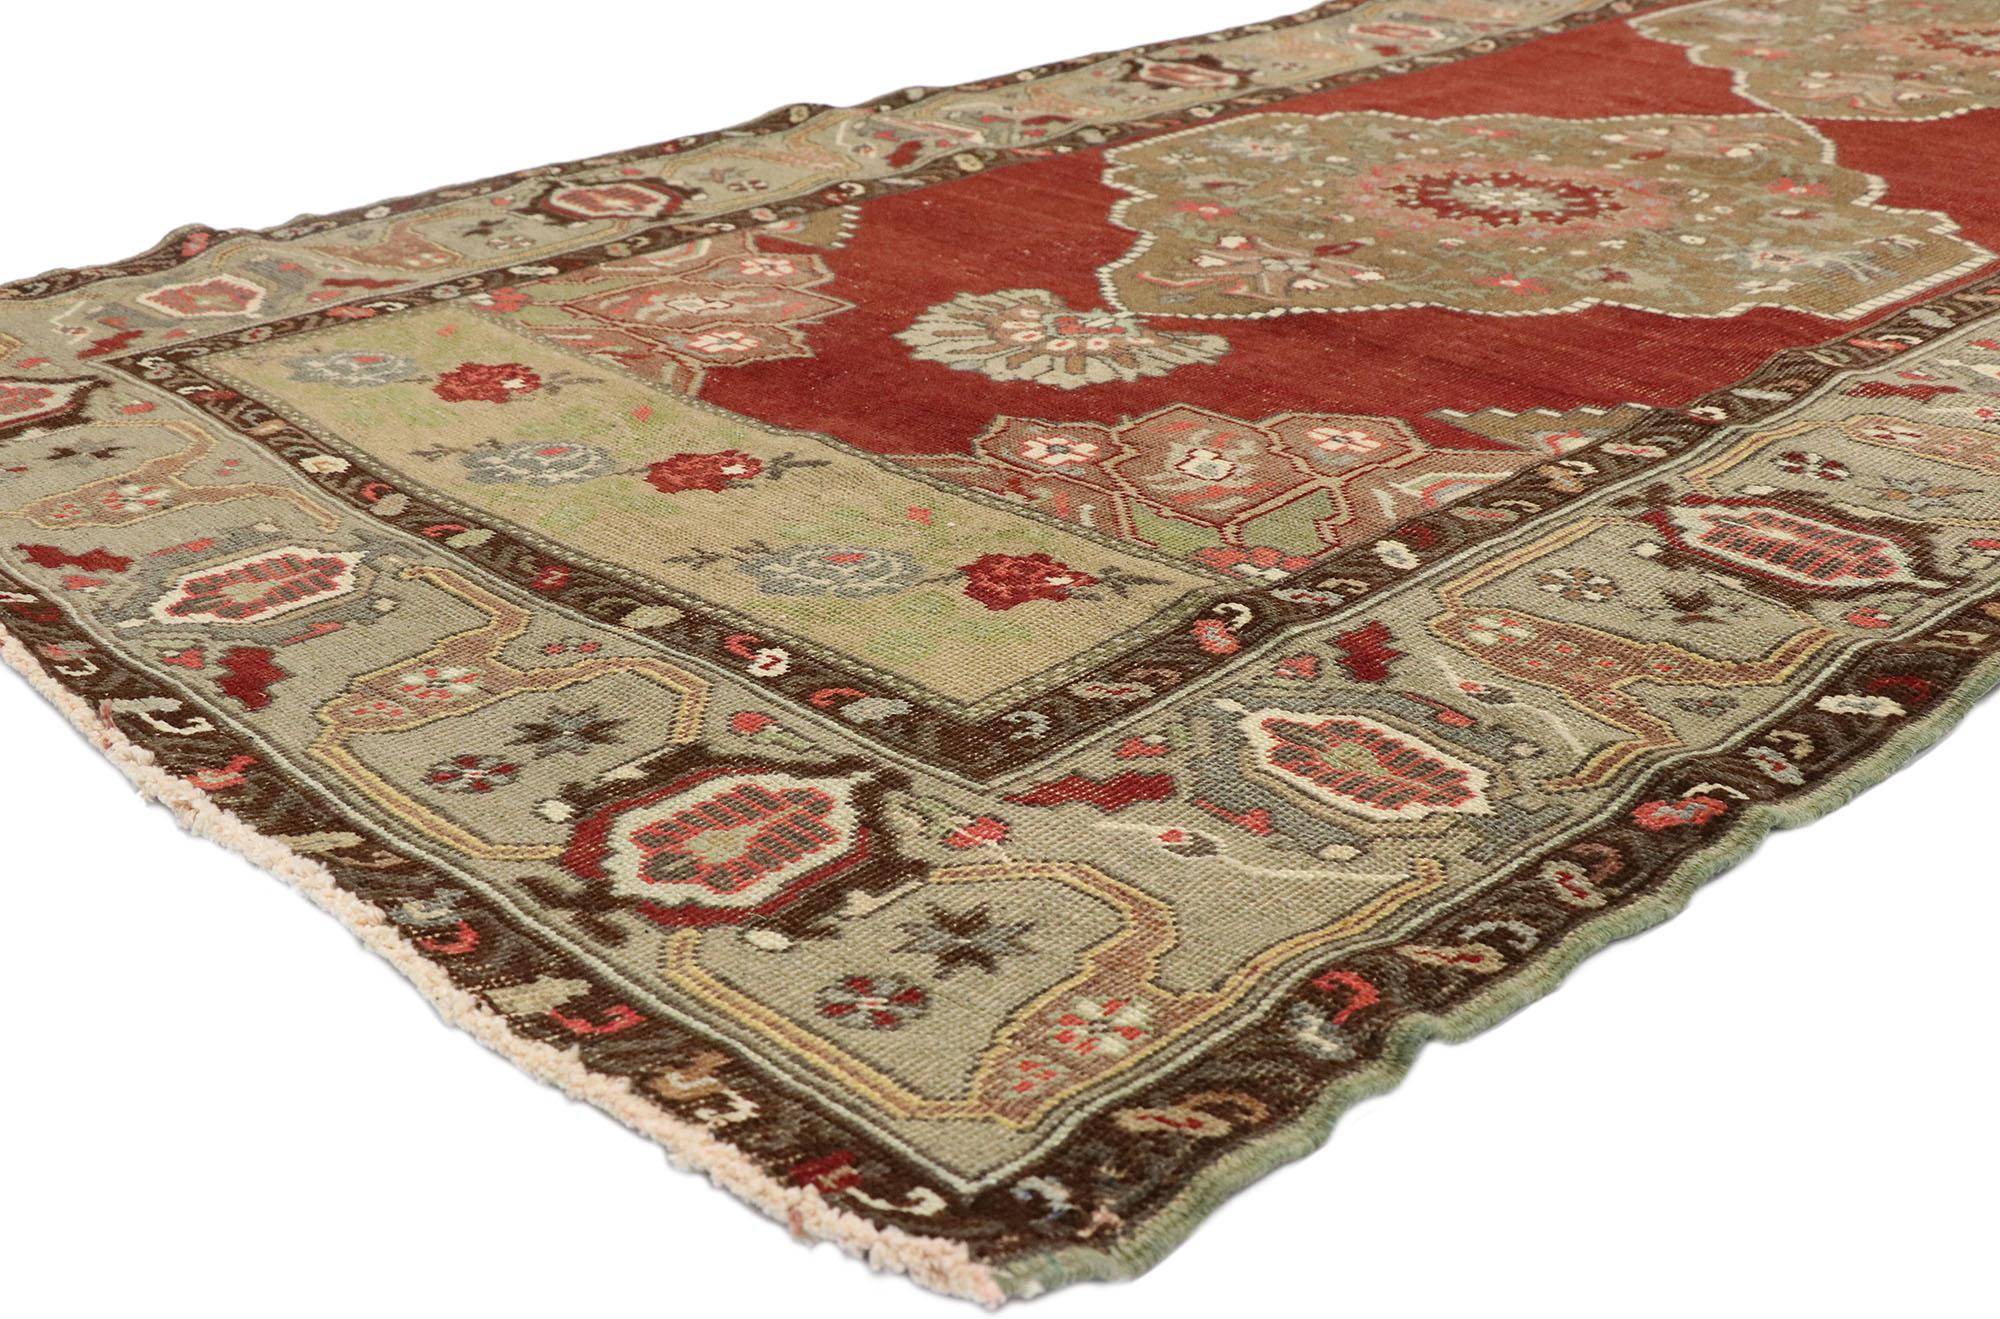 51552, vintage Turkish Oushak Runner with Traditional Modern style, Hallway Runner. This hand-knotted wool vintage Turkish Oushak runner featuring three large stacked geometric medallions and tribal motifs in an open abrashed dark red field